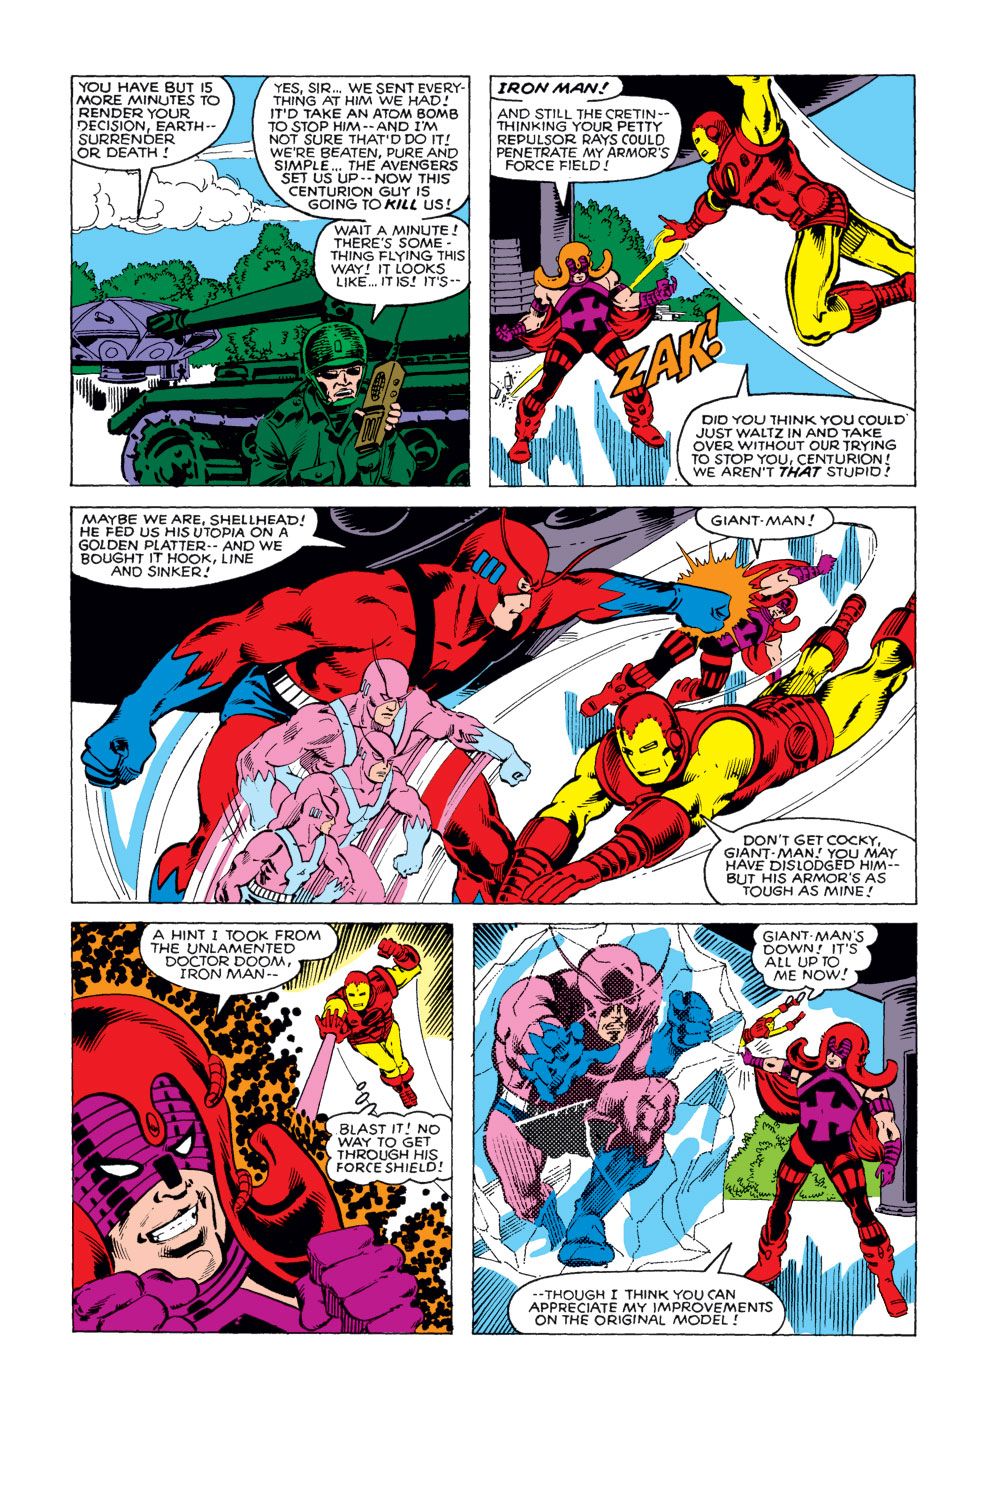 What If? (1977) issue 29 - The Avengers defeated everybody - Page 15